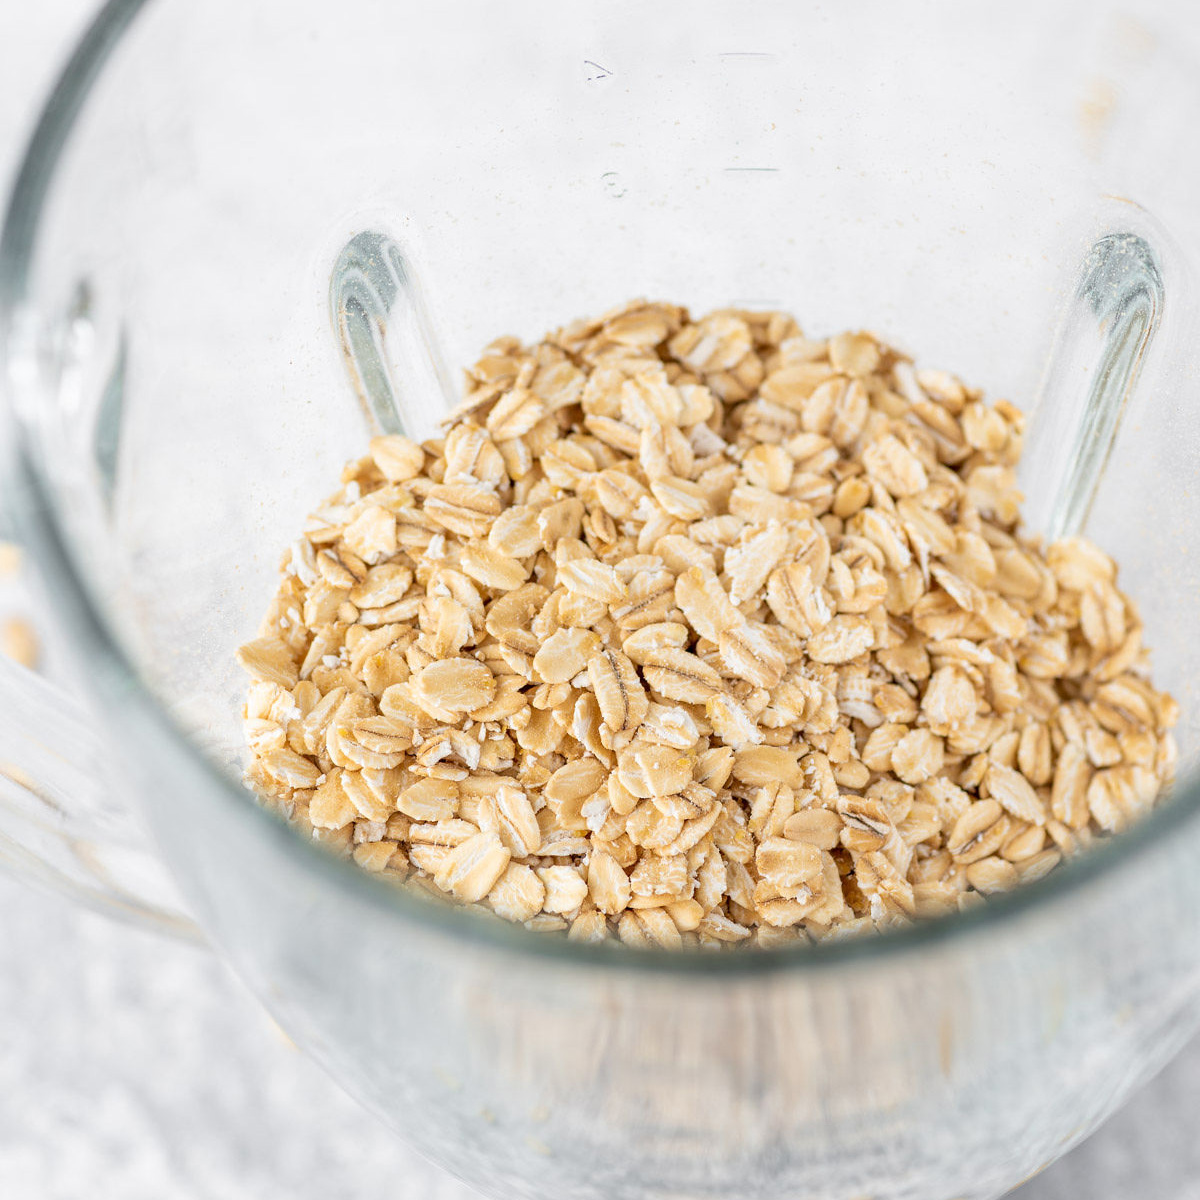 How To Make Oat Flour 2